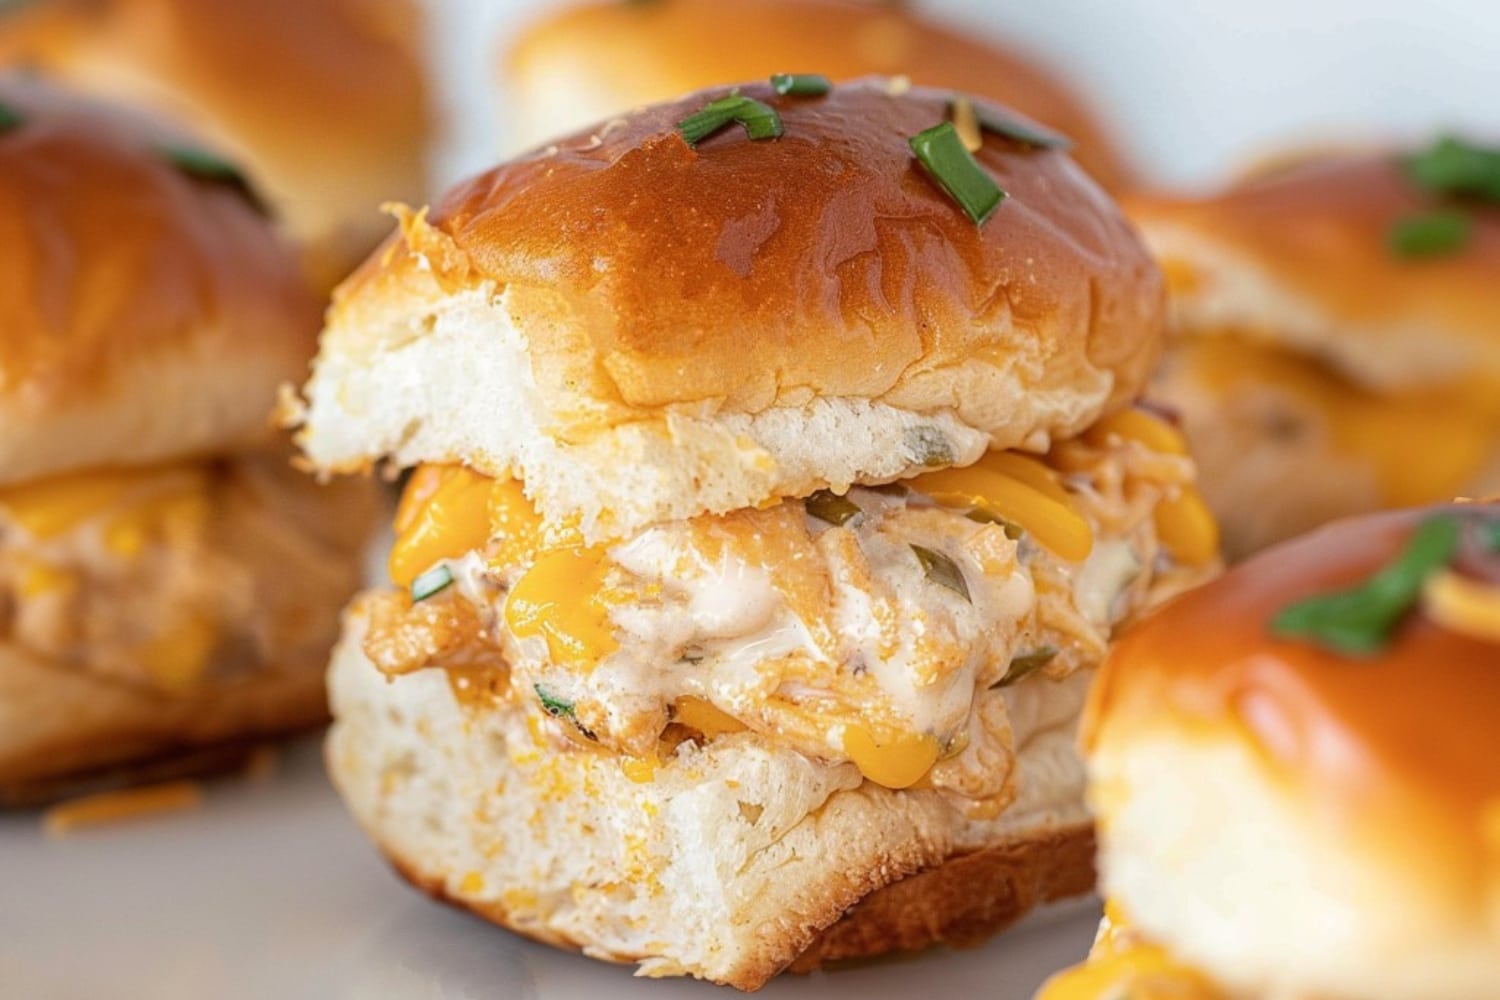 Homemade crack chicken sliders with cheese and ranch dressing